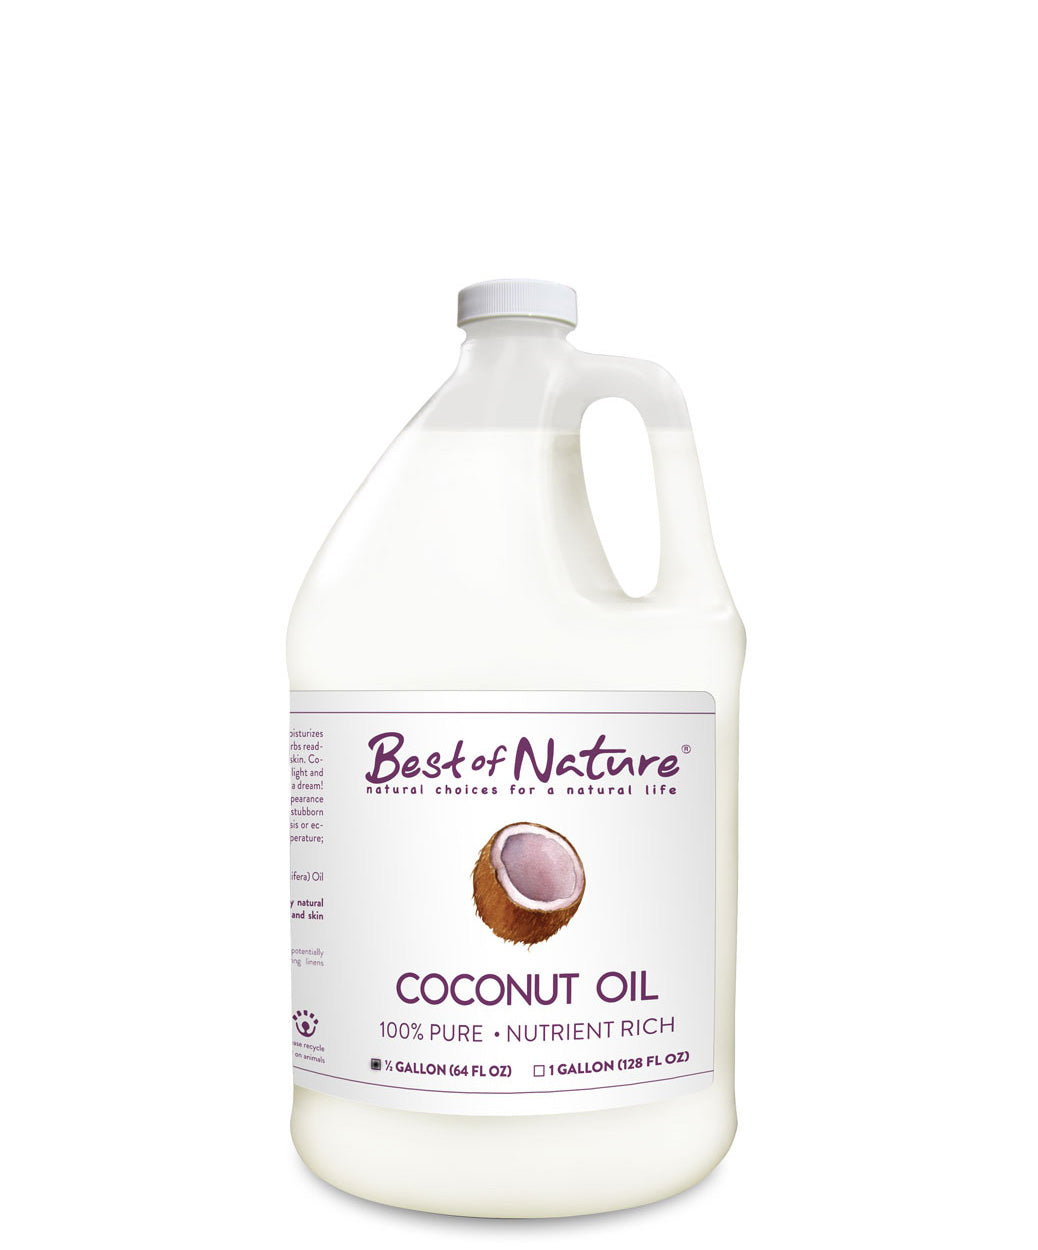 Best of Nature 100% Pure Coconut Oil